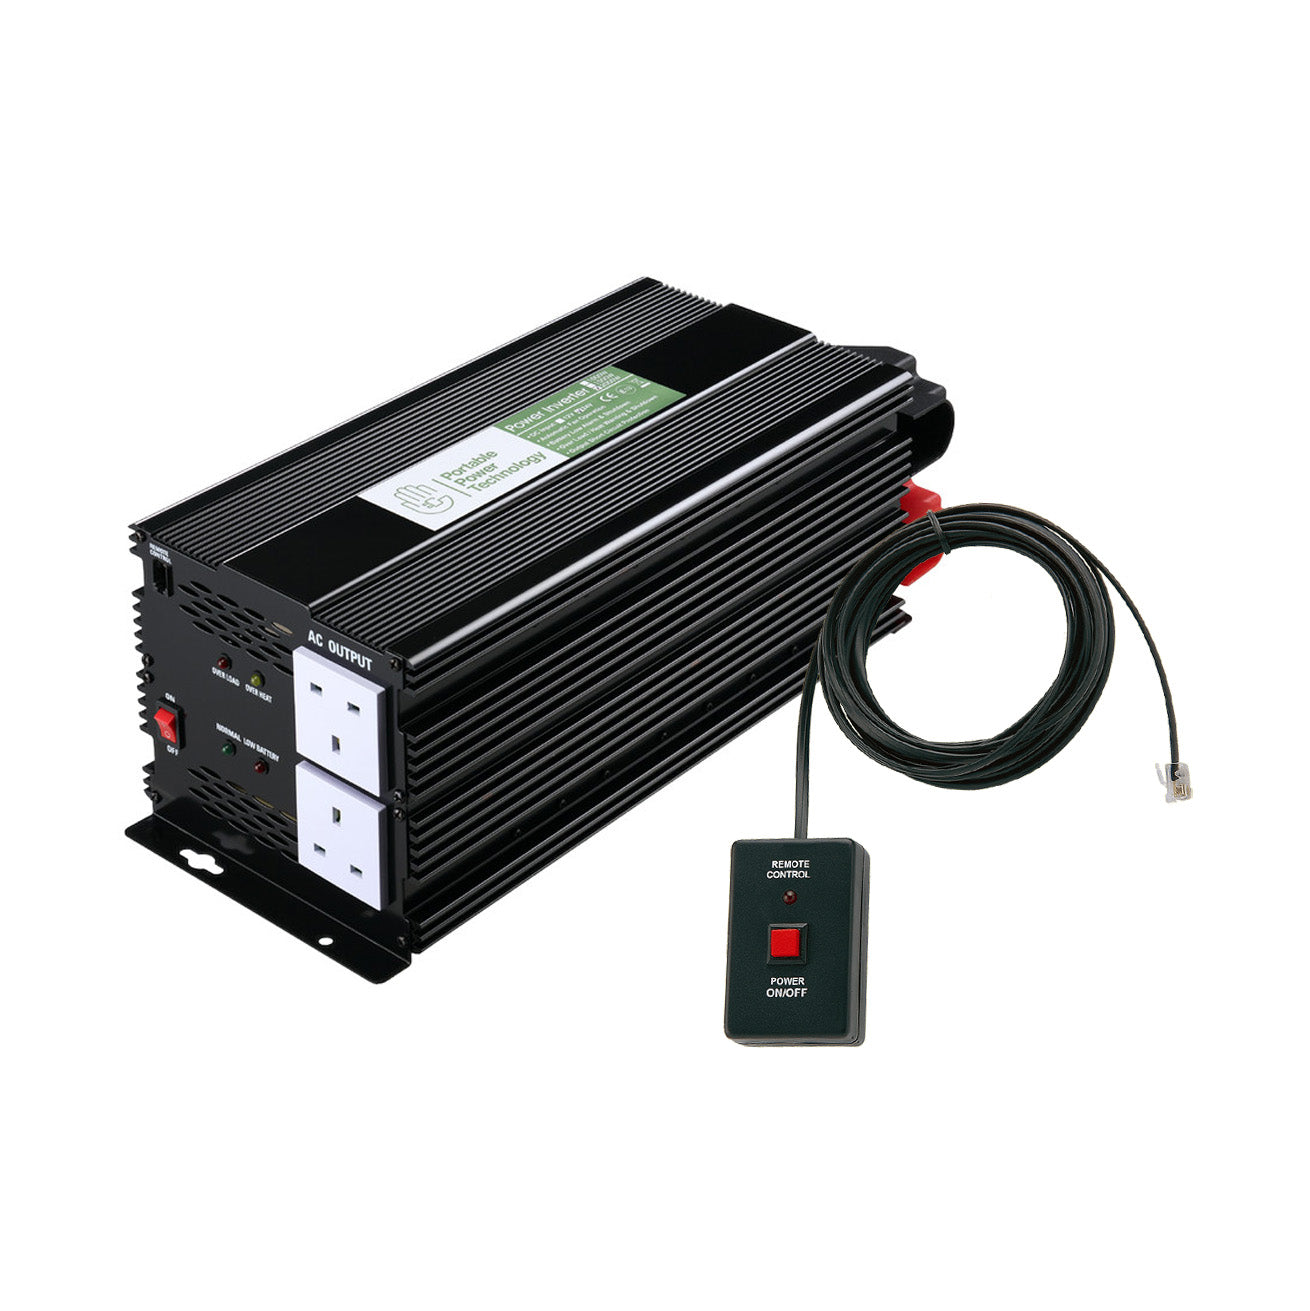 Portable Power Technology 2000W 12V Modified Sinewave Power Inverter with Remote control - maplin.co.uk